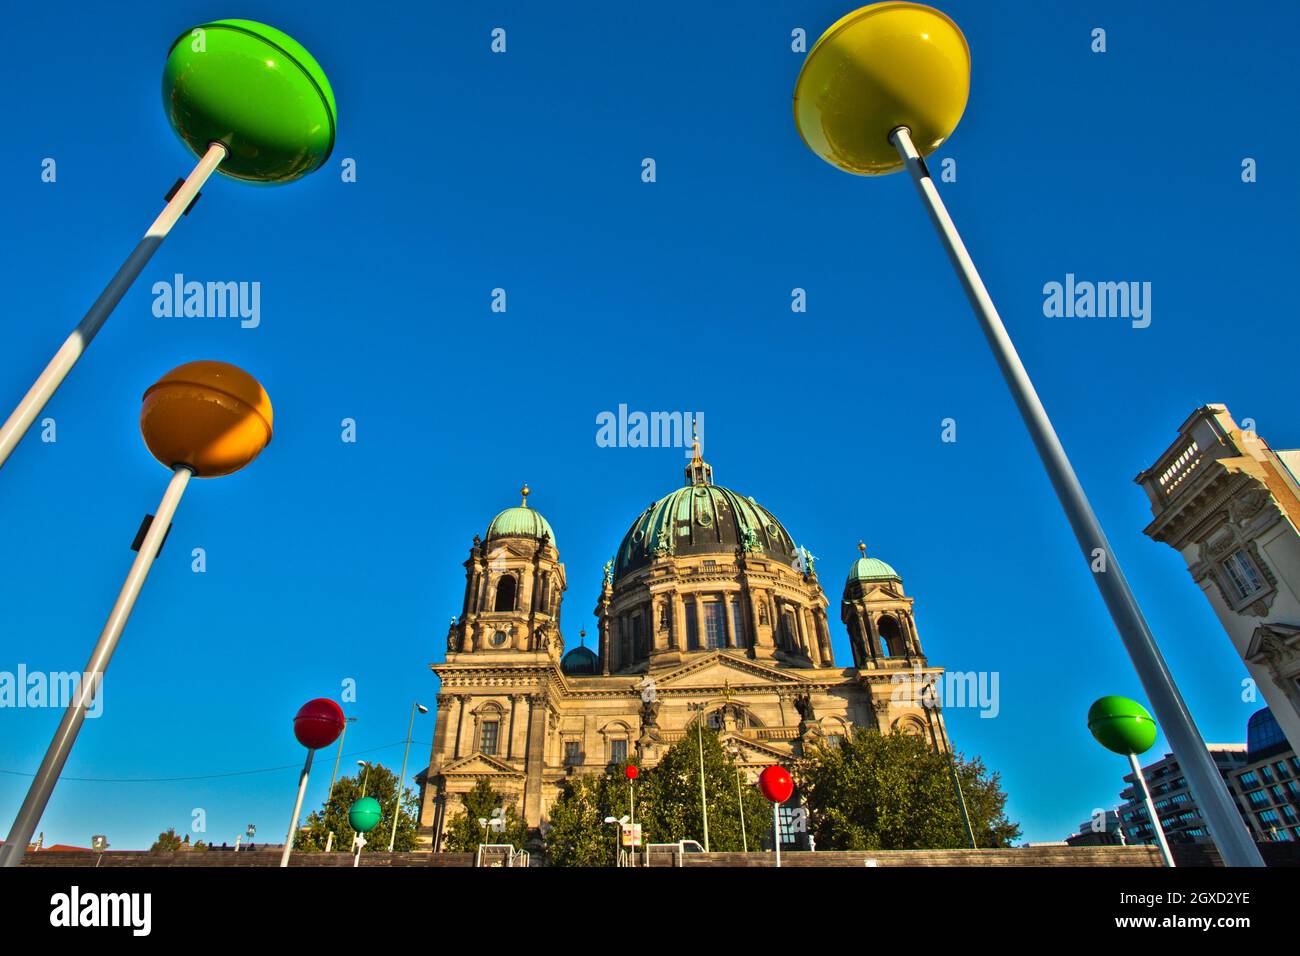 Events commemorating the founding of Berlin and its History in Schlossplatz, Mitte, on background Berliner Dom, Berlin Cathedral, Oberpfarrkirche Stock Photo